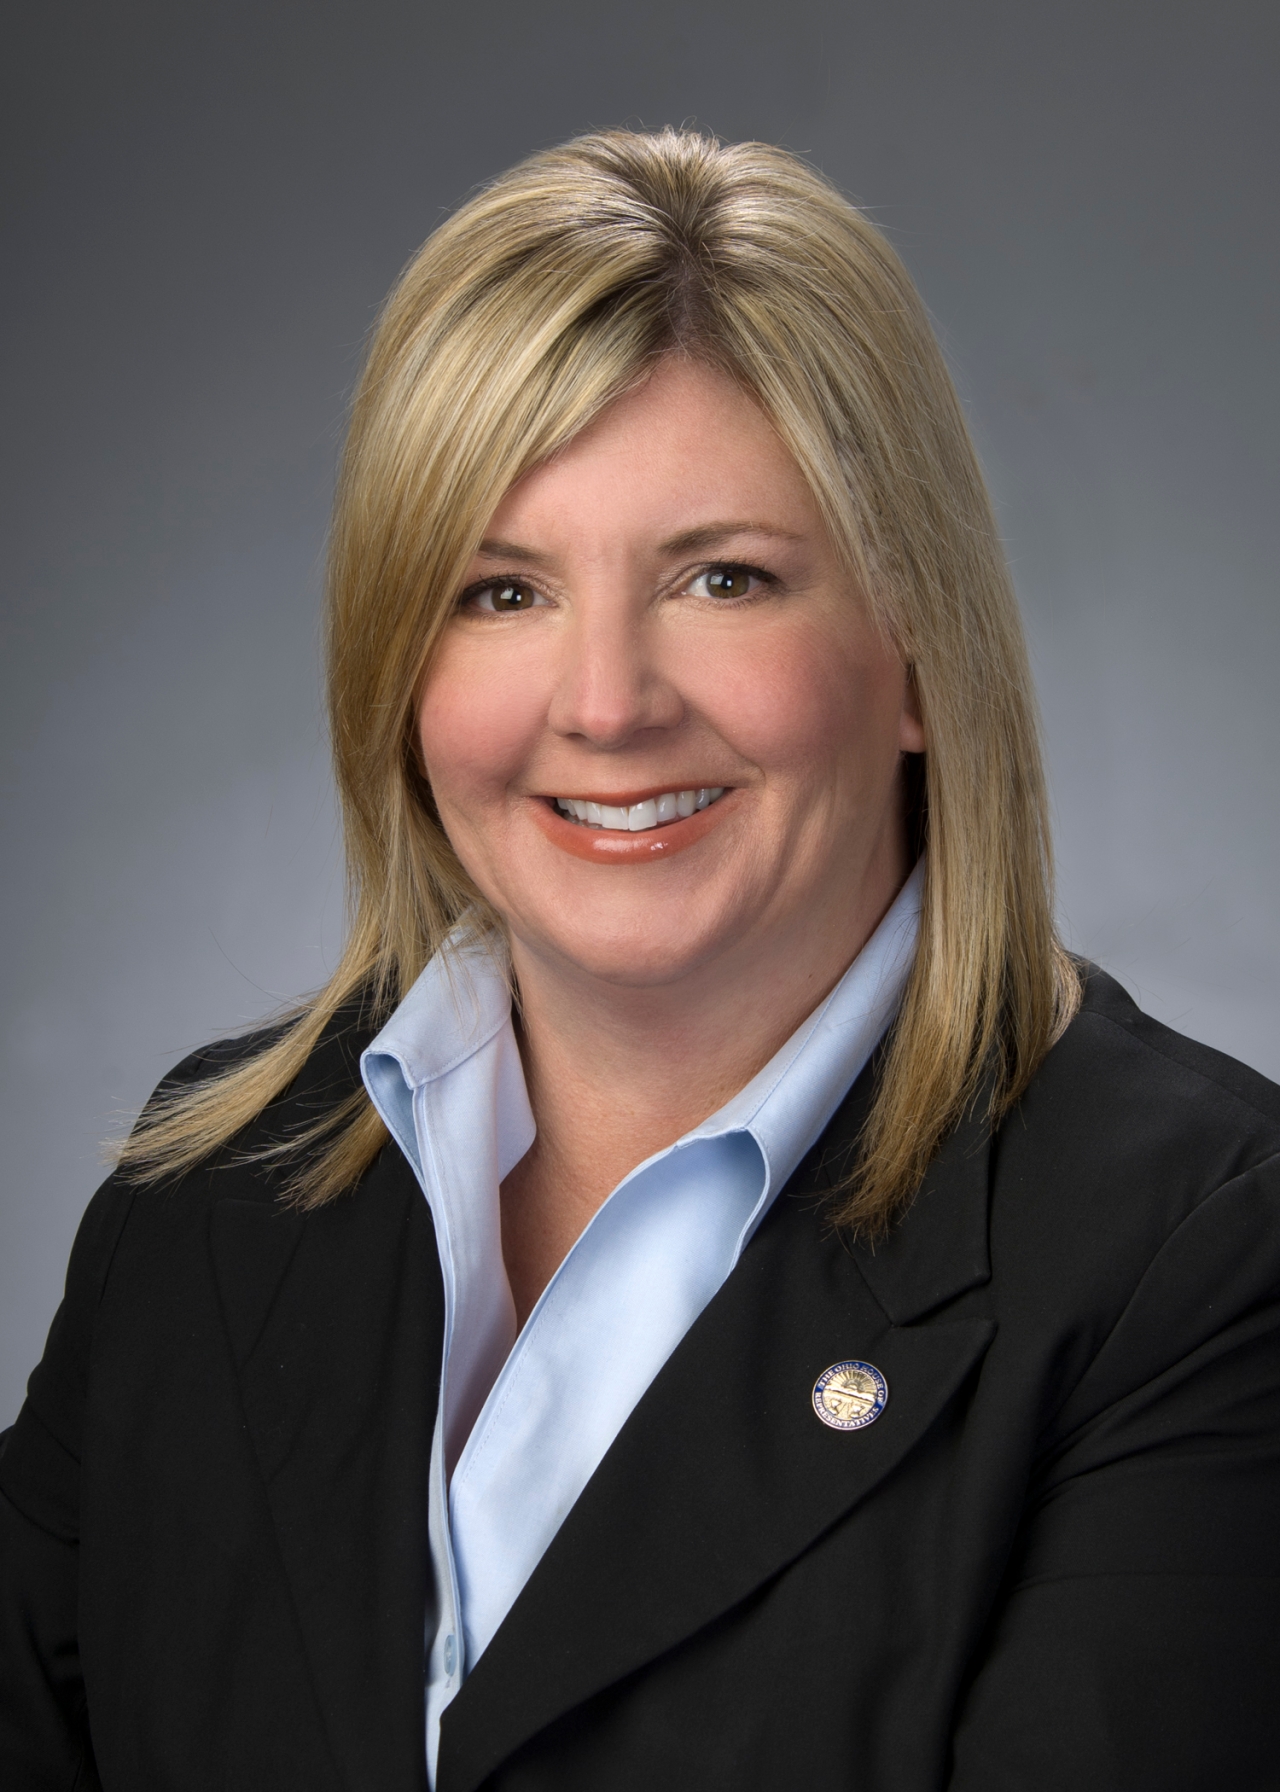 Rep. Kunze Leads on Bill Strengthening Penalties for Strangulation in Domestic Violence Situations